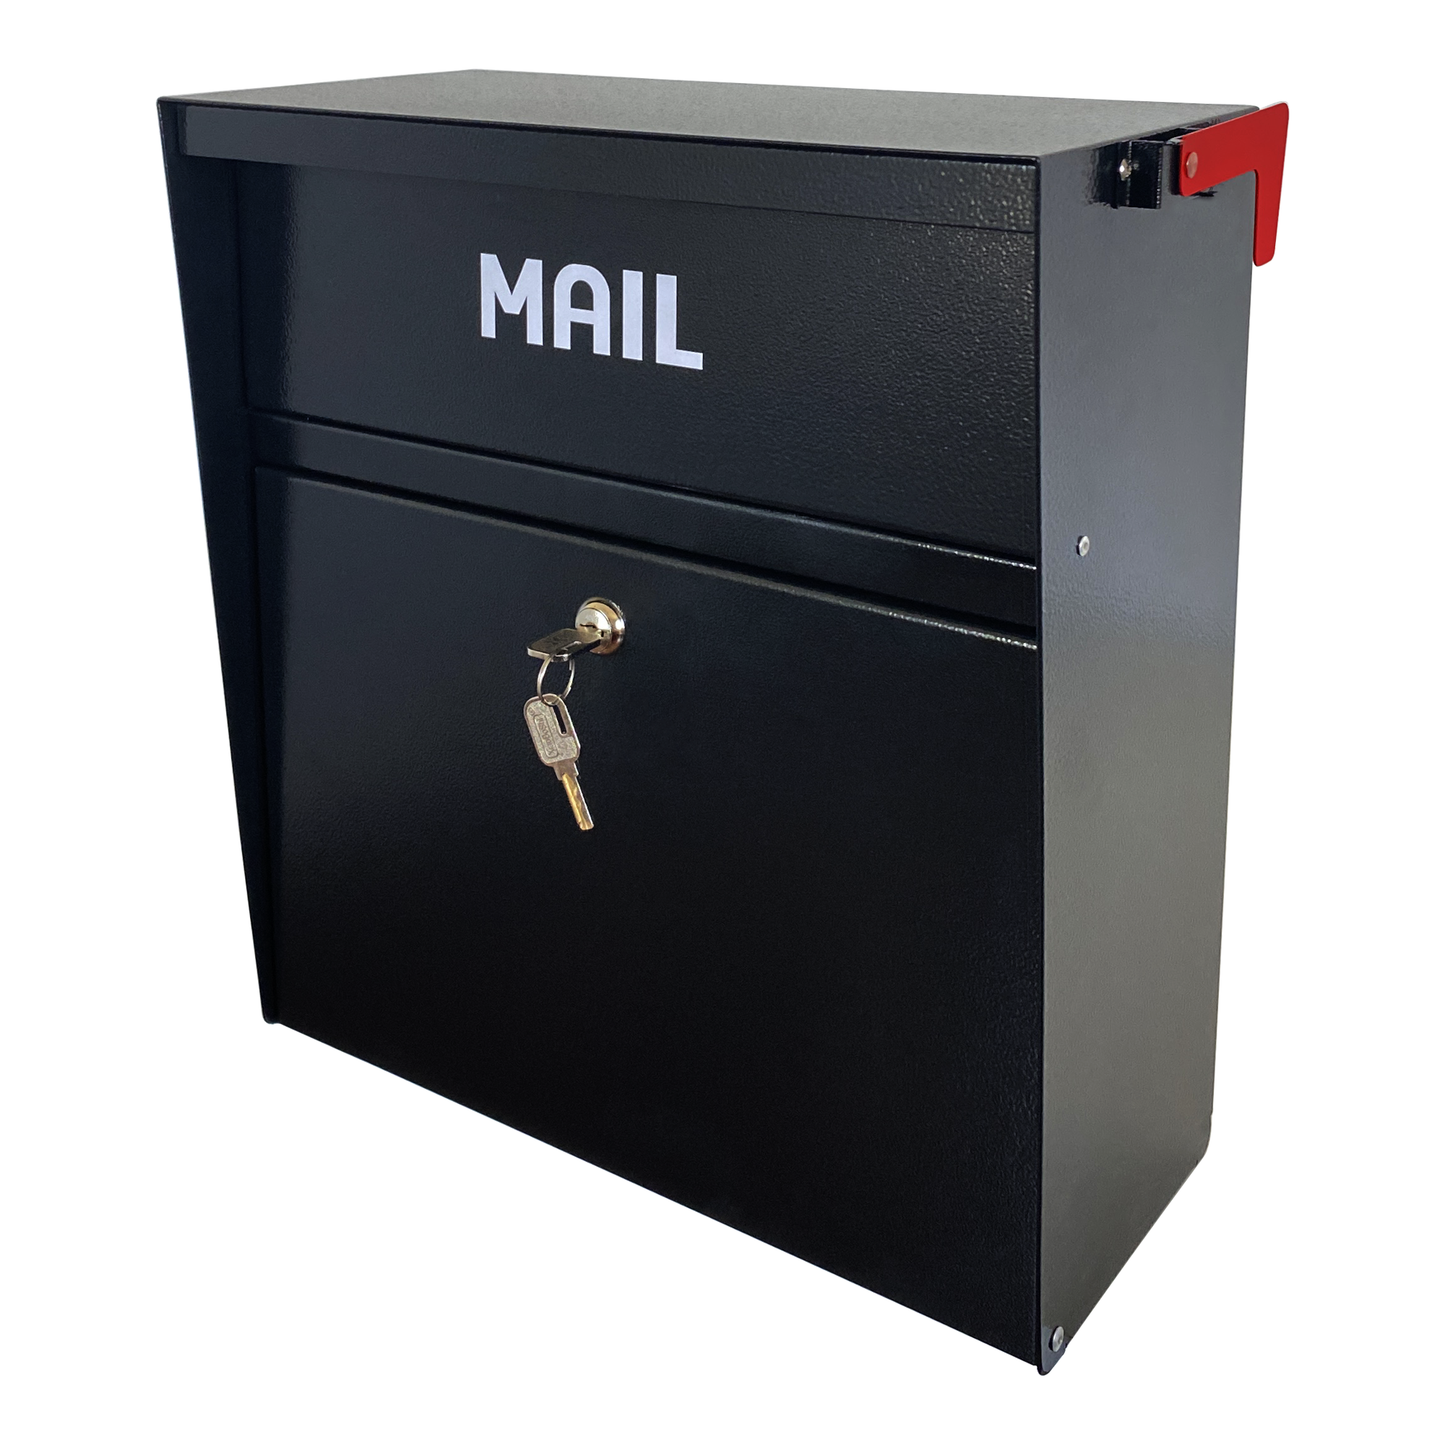 D5-B - Rainproof Wall Mount Mailbox with Outgoing Mail Flag and Holder, Rainproof Anti-Fishing Locking Mailbox, Heavy Duty Residential Security Mailbox, Payment Drop Box with Lock, Black